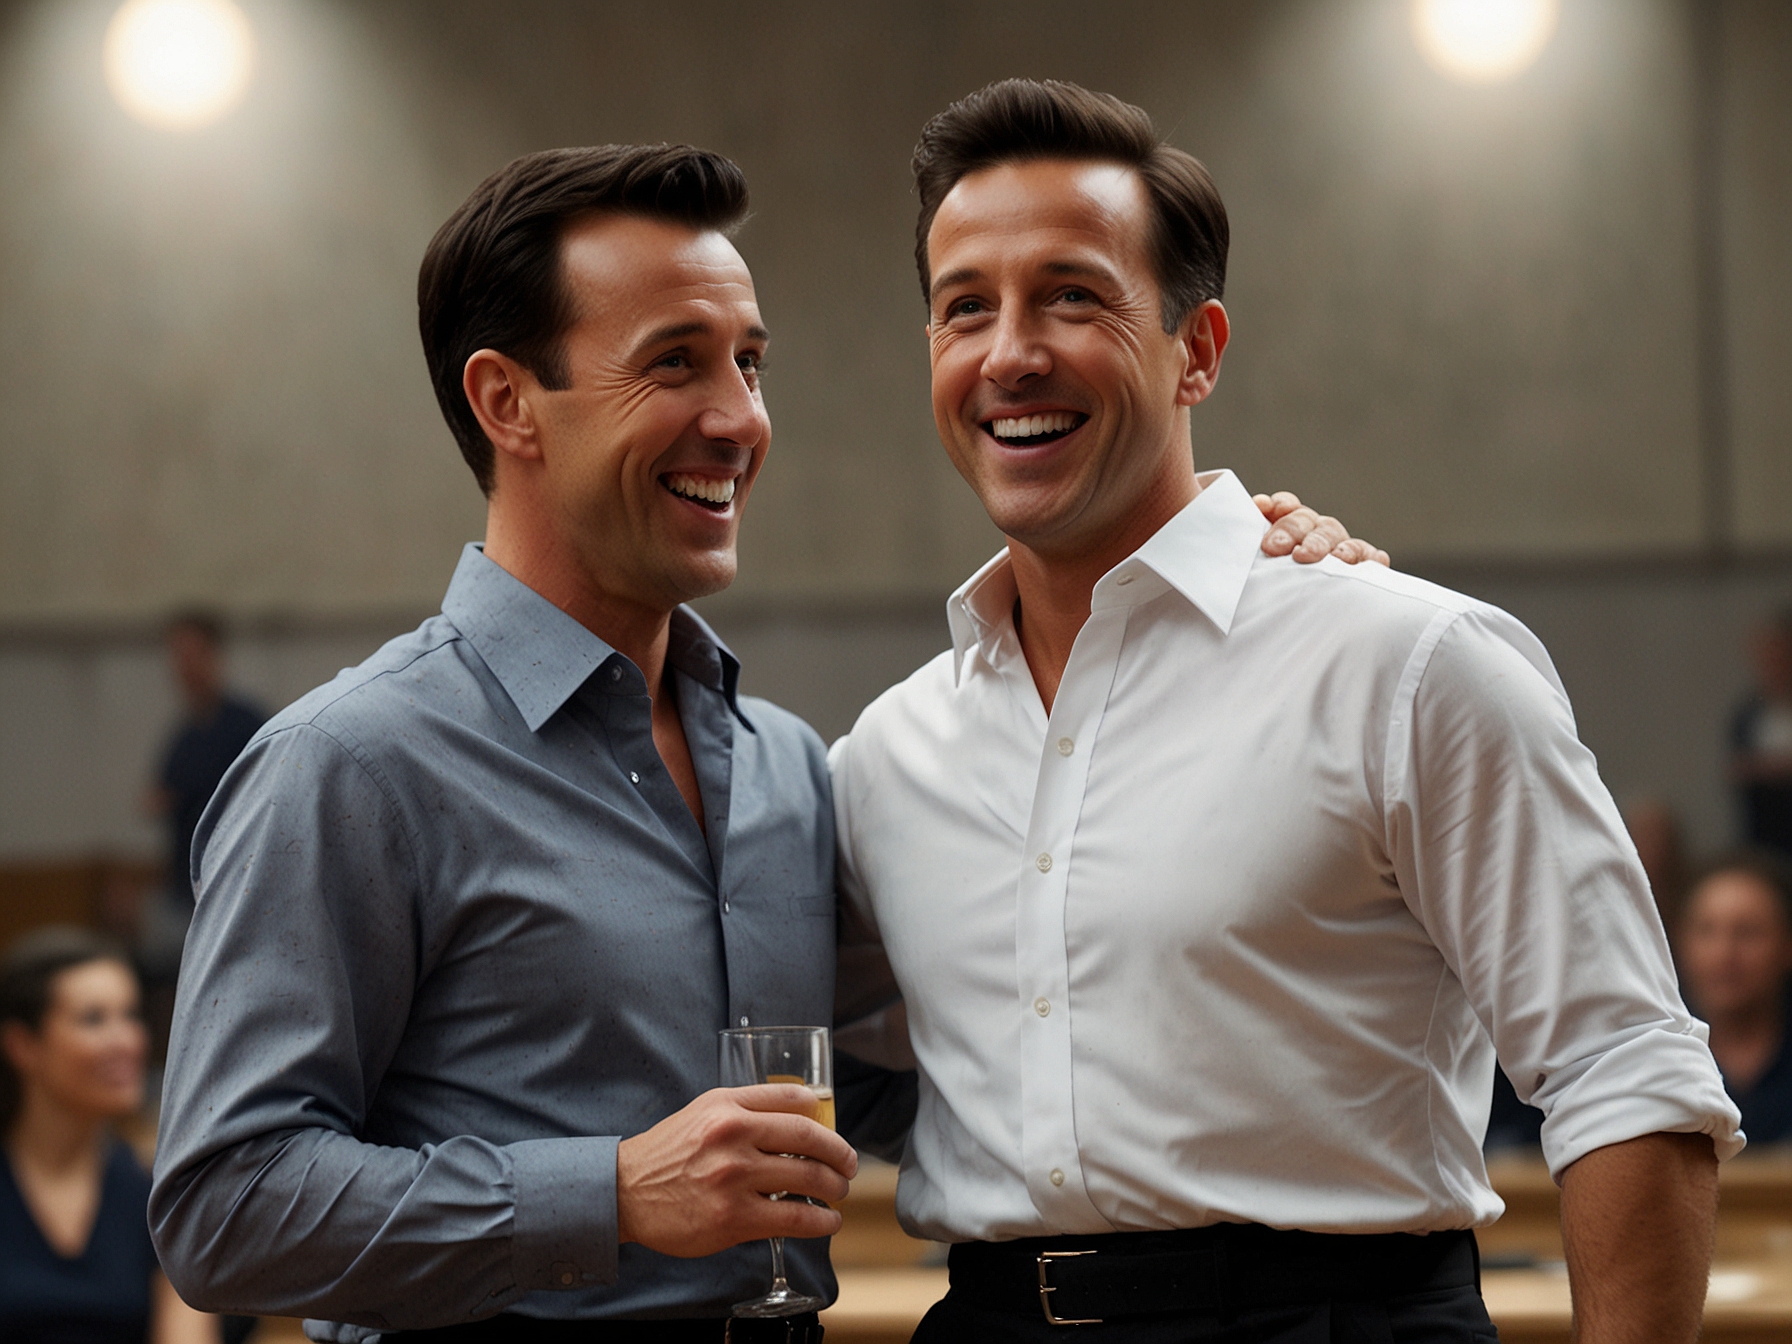 Anton du Beke and Giovanni Pernice sharing a light-hearted moment during a rehearsal, showcasing their strong bond.